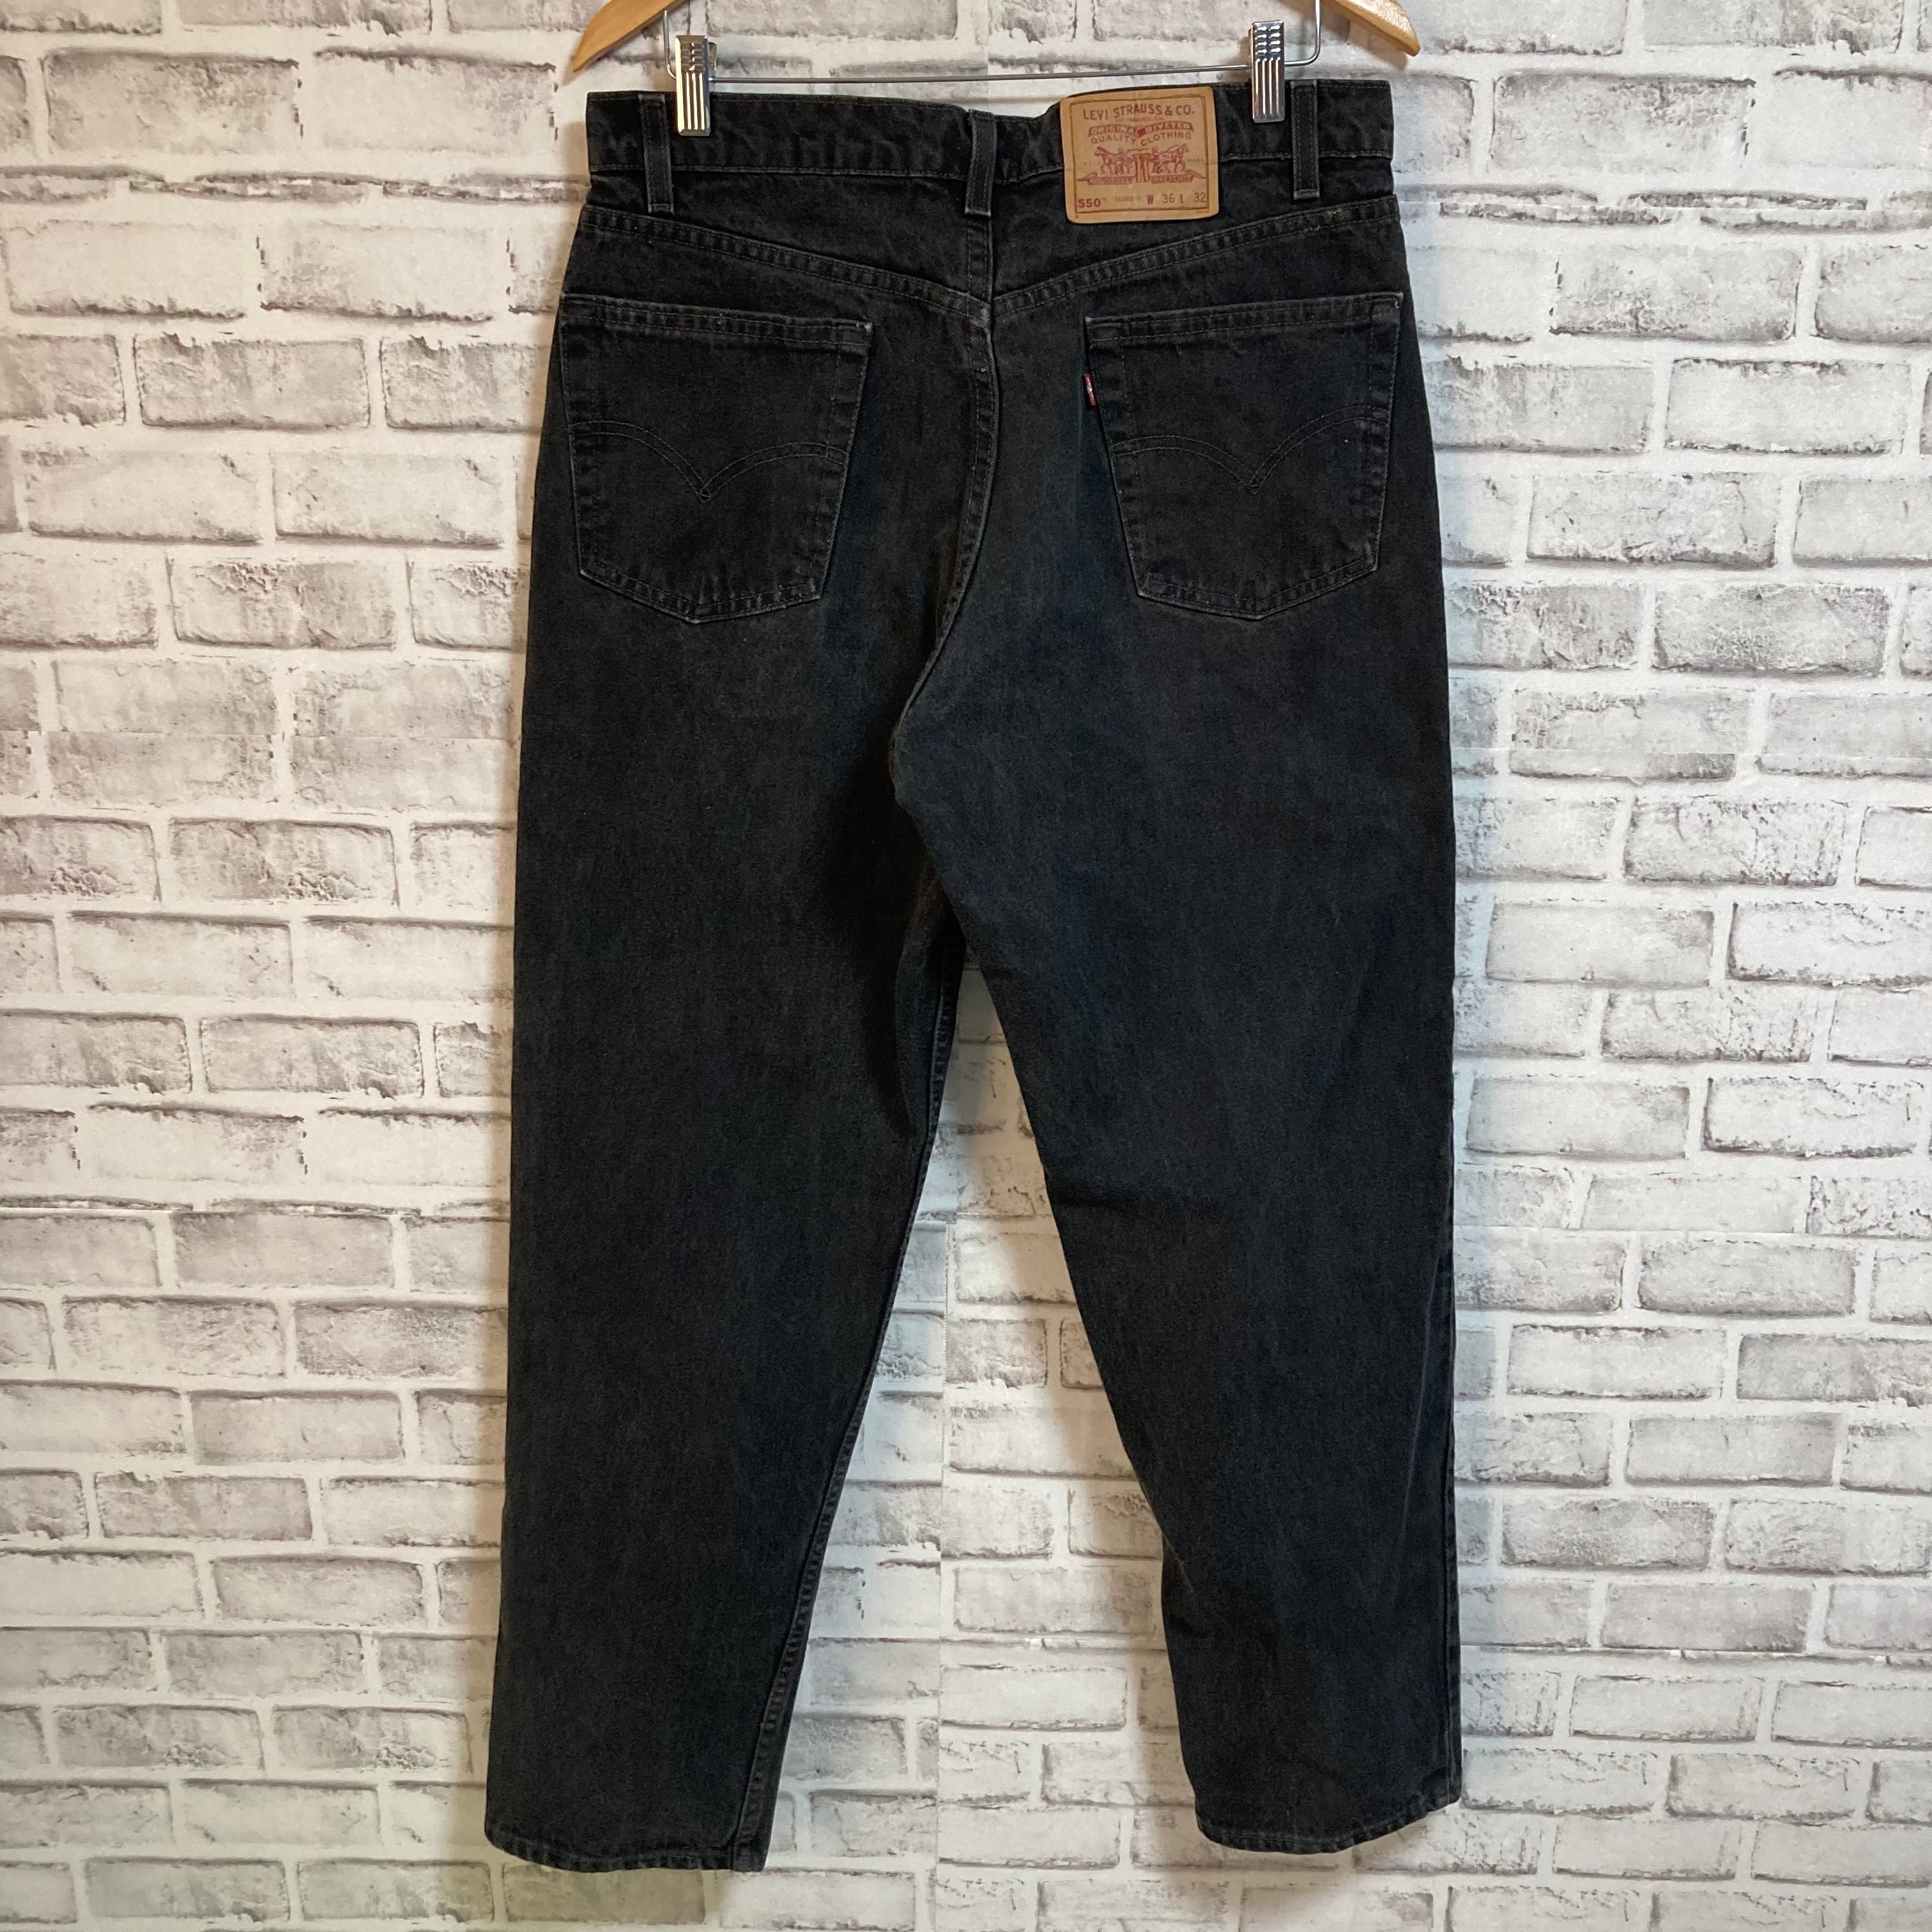 Levi's 550】W36×L32 Made in USA 90s Denim Jeans リーバイス 550 USA